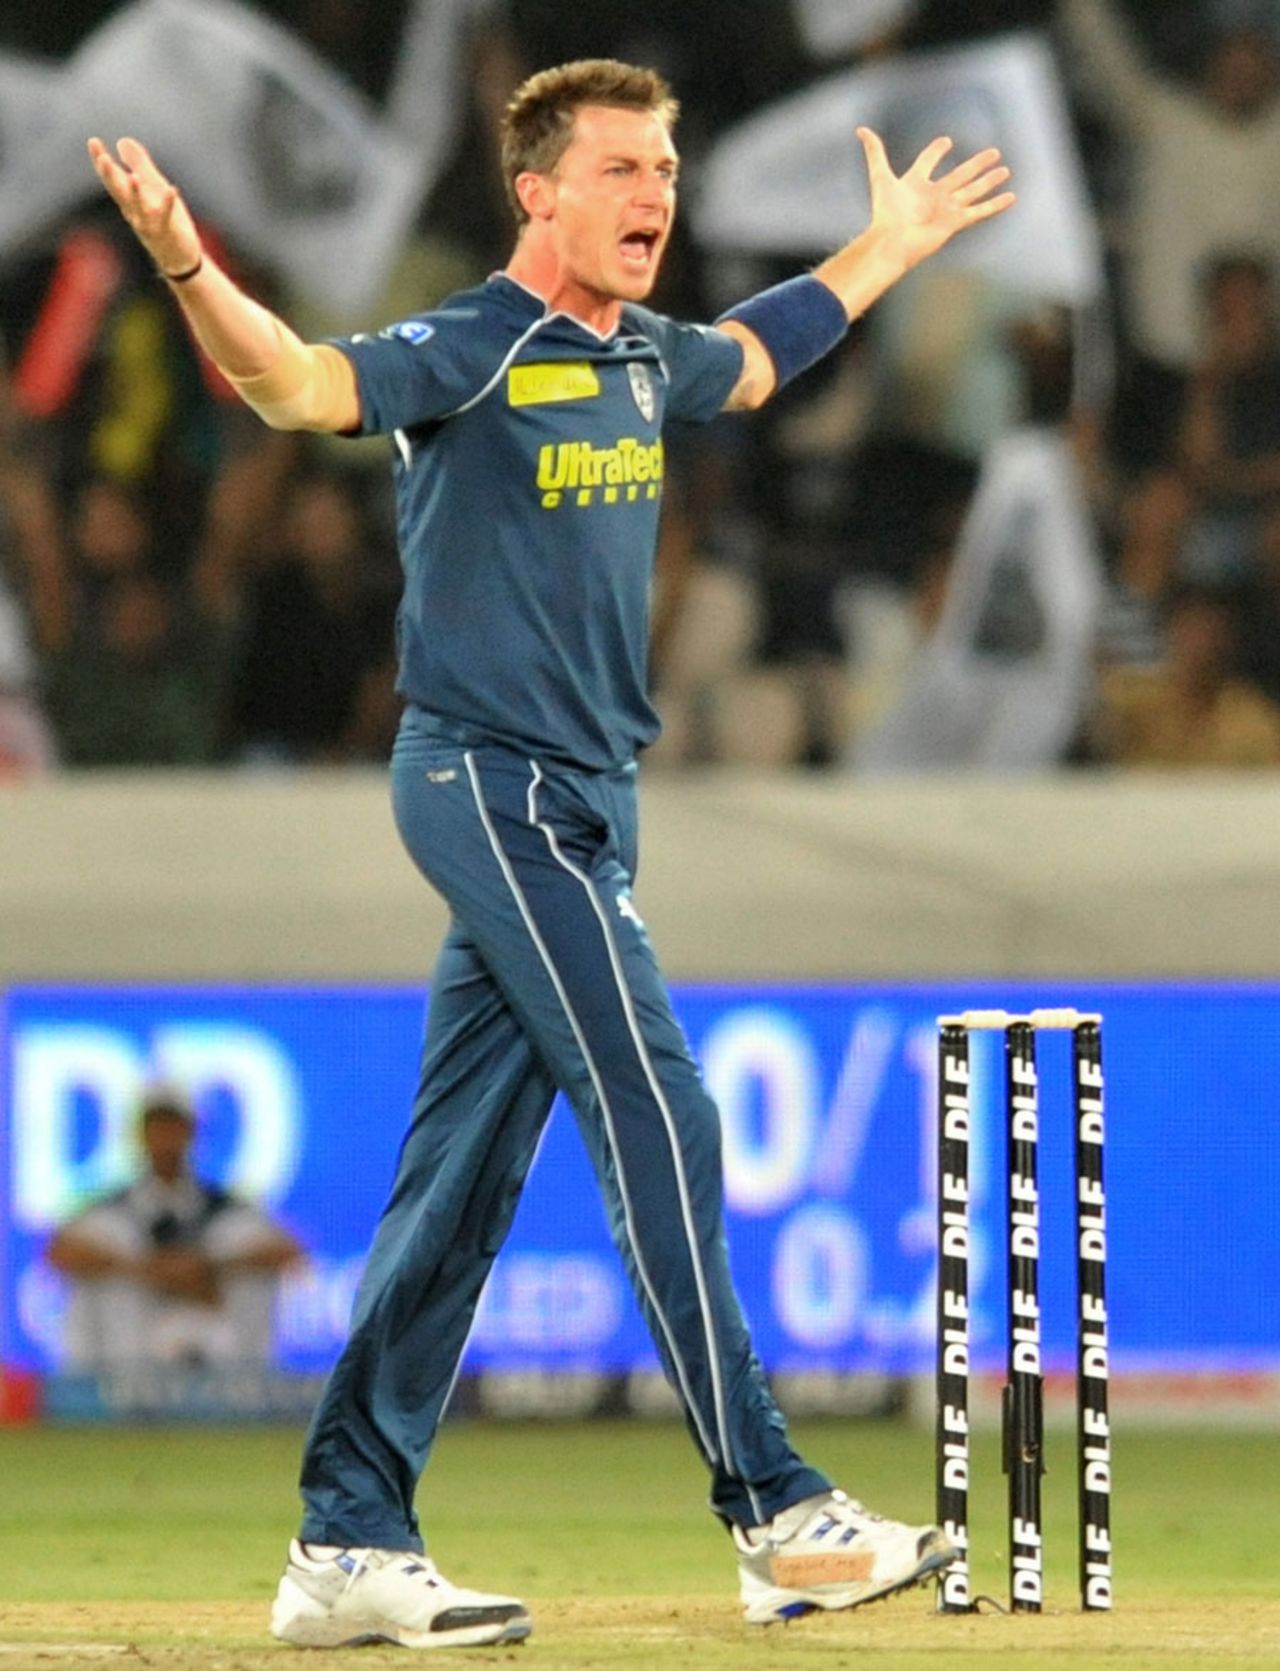 Dale Steyn exults after striking early in his spell, Deccan Chargers v Delhi Daredevils, IPL 2011, Hyderabad, May 5, 2011